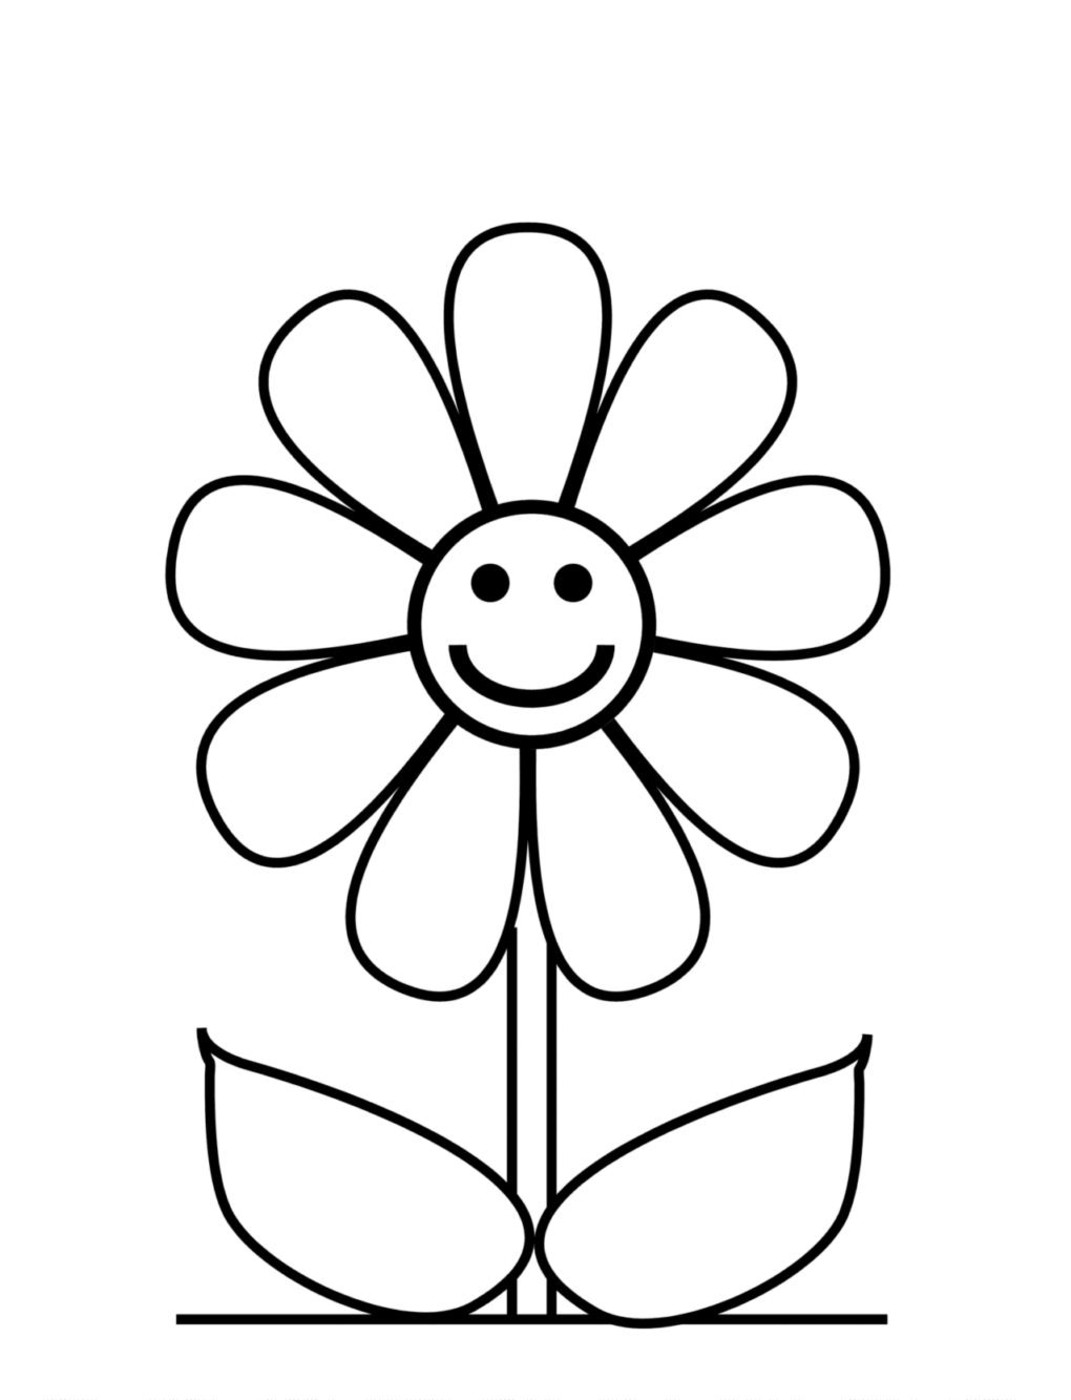 Line Drawings Flower Coloring Page On Photography Free Coloring ...